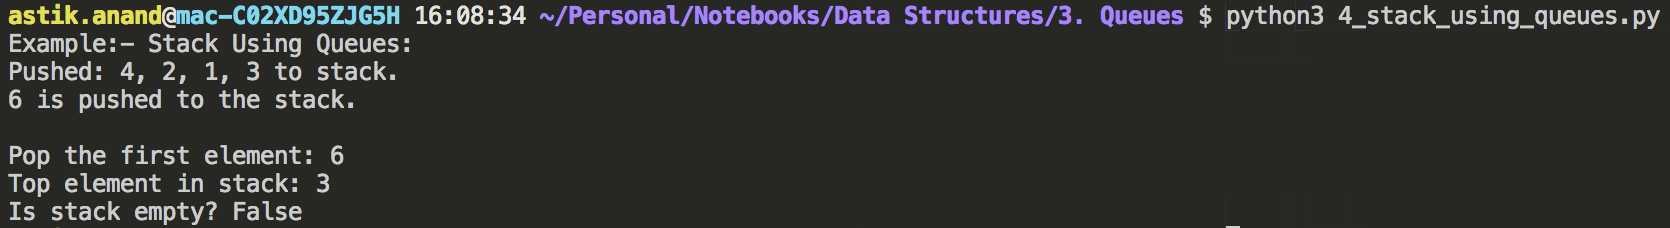 stack_using_queus_output